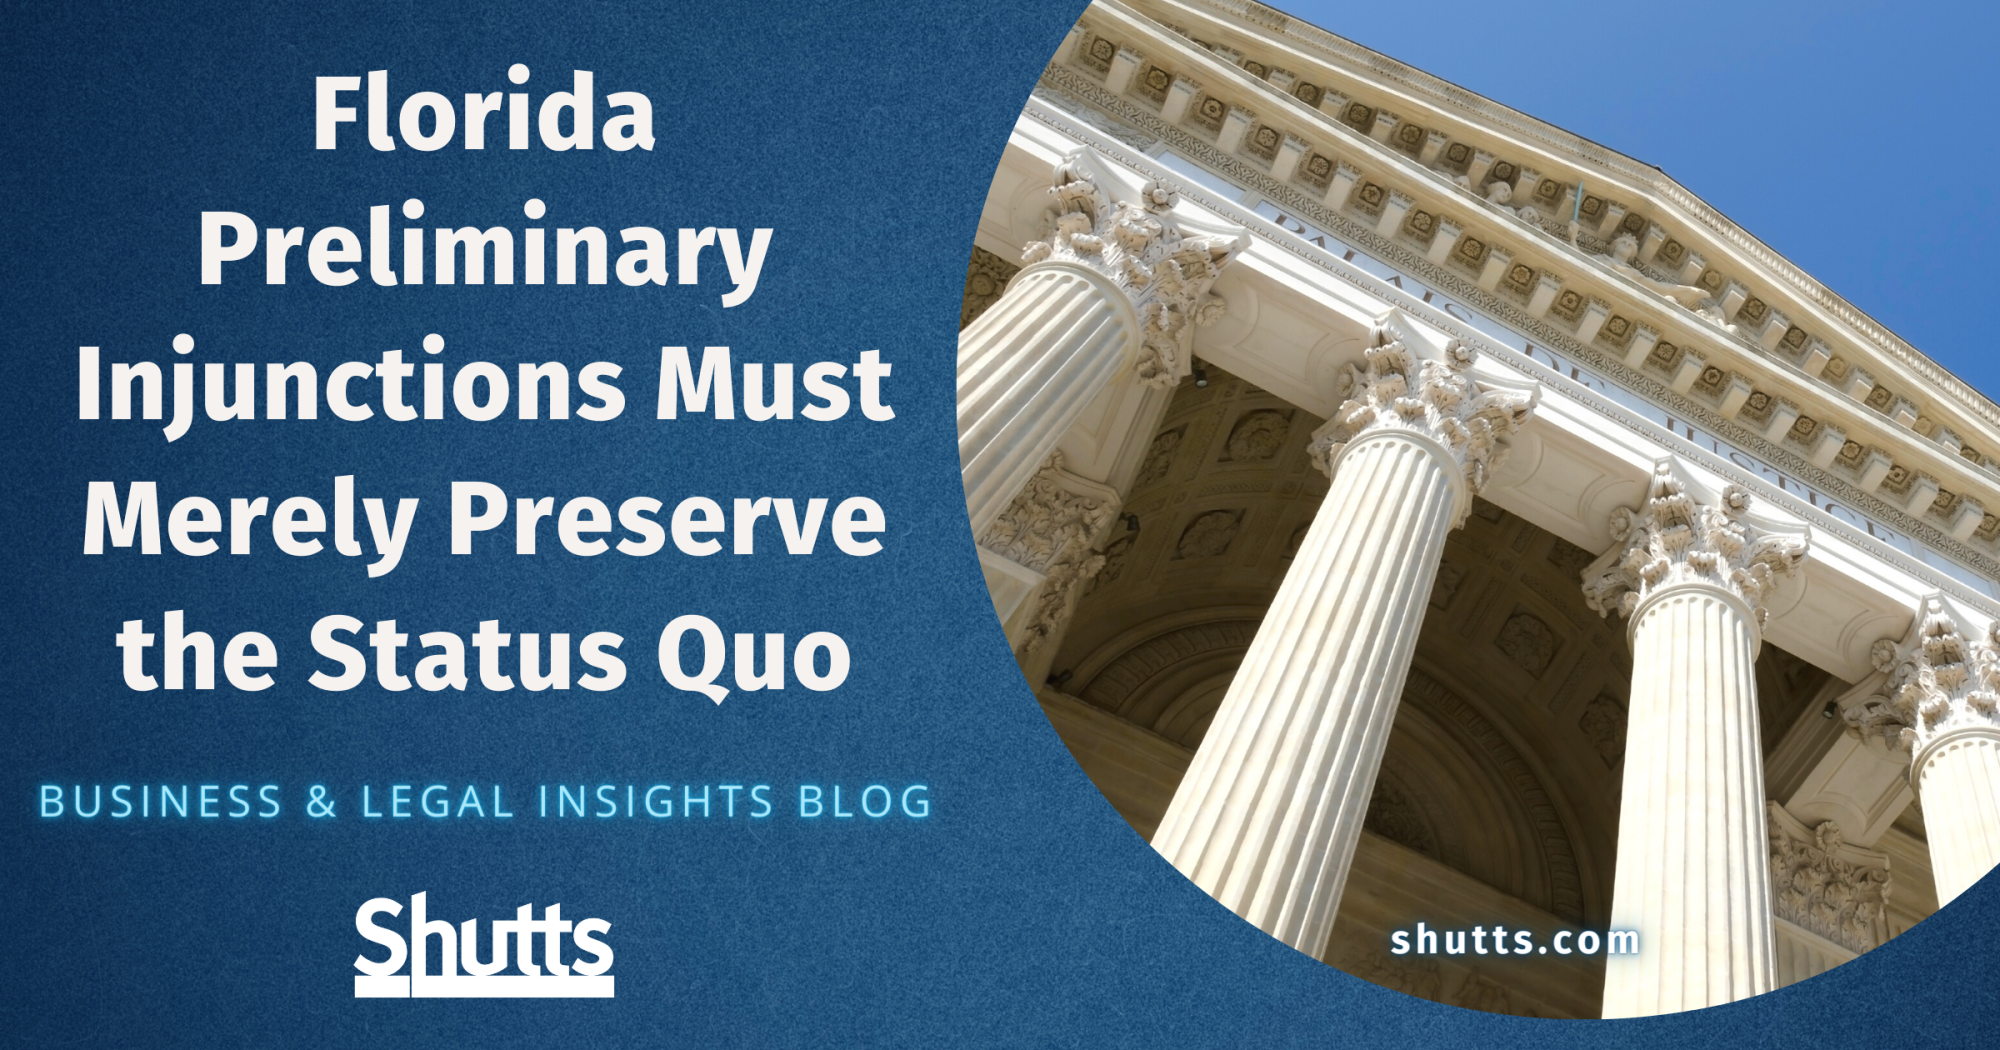 Florida Preliminary Injunctions Must Merely Preserve the Status Quo